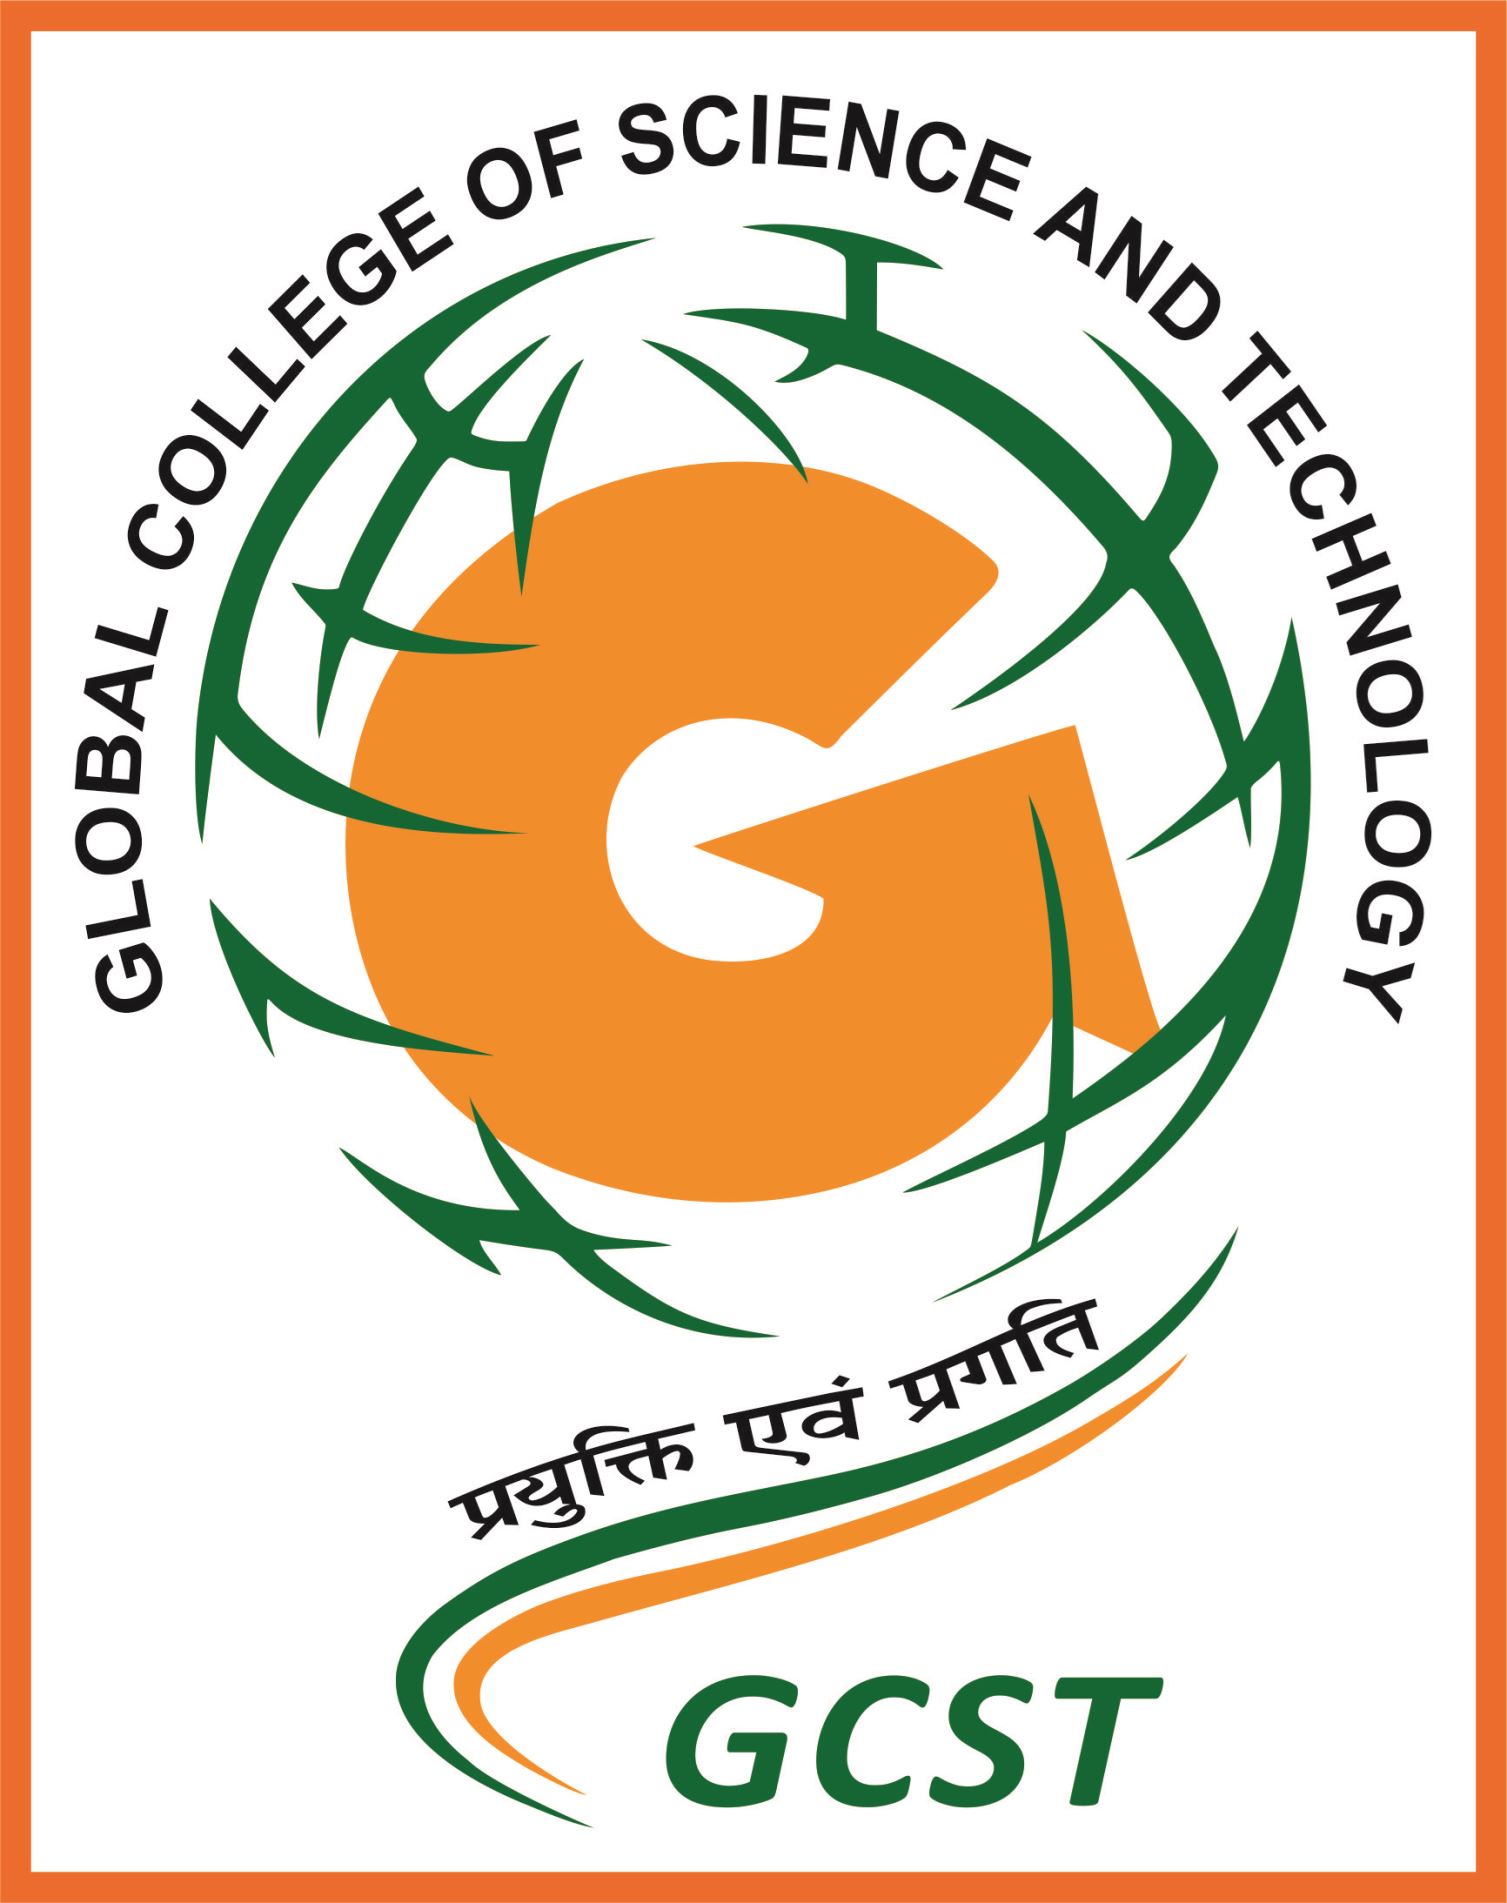 GLOBAL COLLEGE OF SCIENCE AND TECHNOLOGY